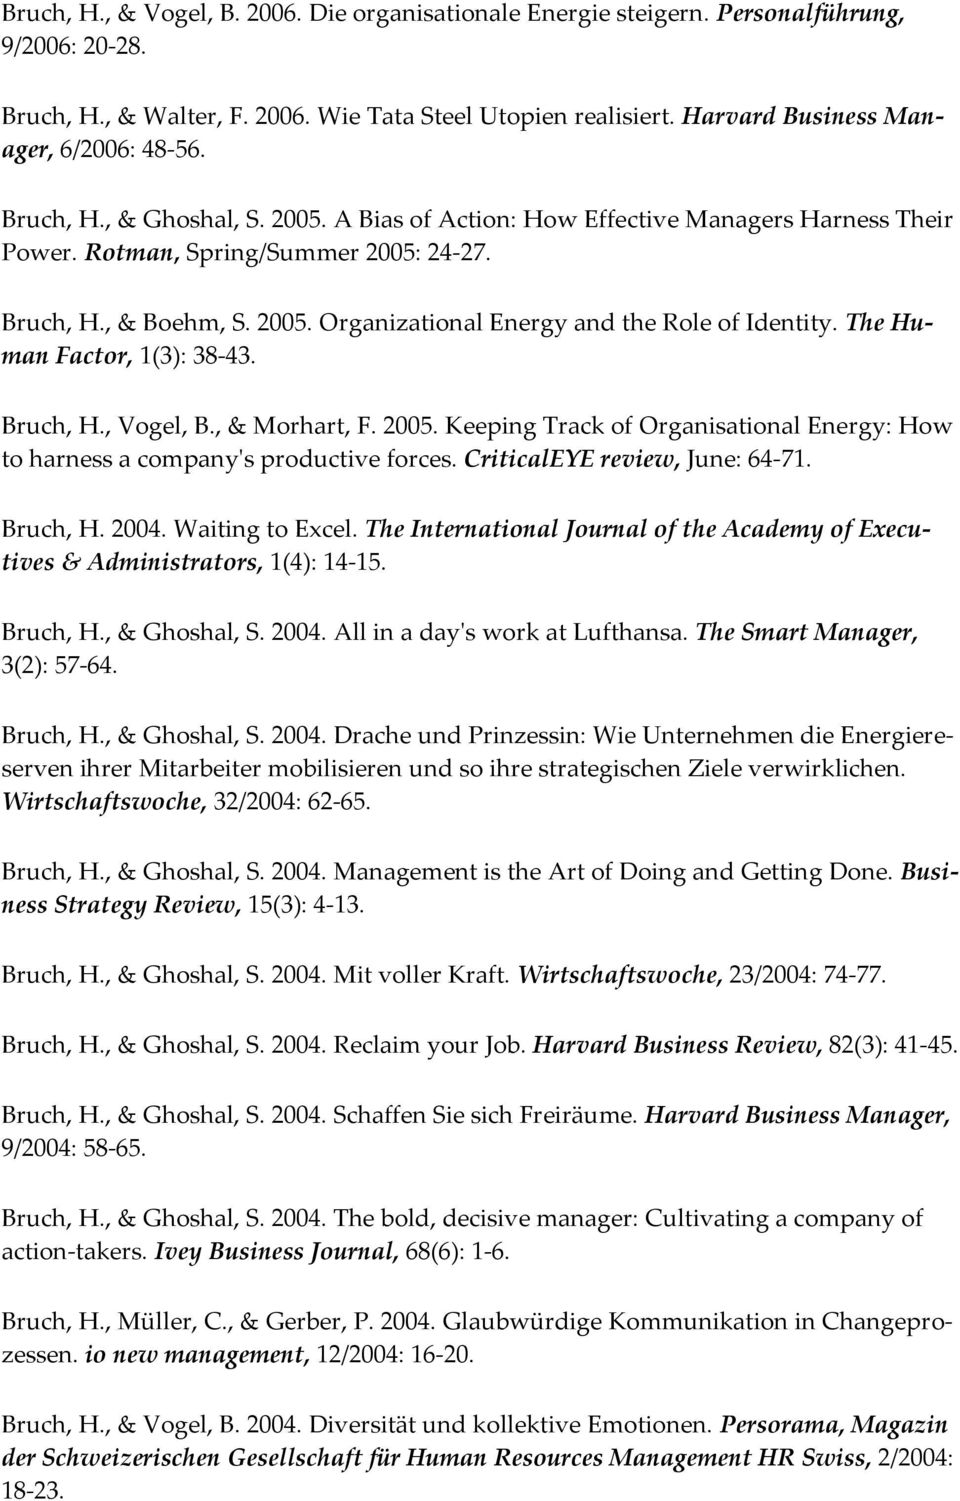 The Human Factor, 1(3): 38-43. Bruch, H., Vogel, B., & Morhart, F. 2005. Keeping Track of Organisational Energy: How to harness a company's productive forces. CriticalEYE review, June: 64-71.